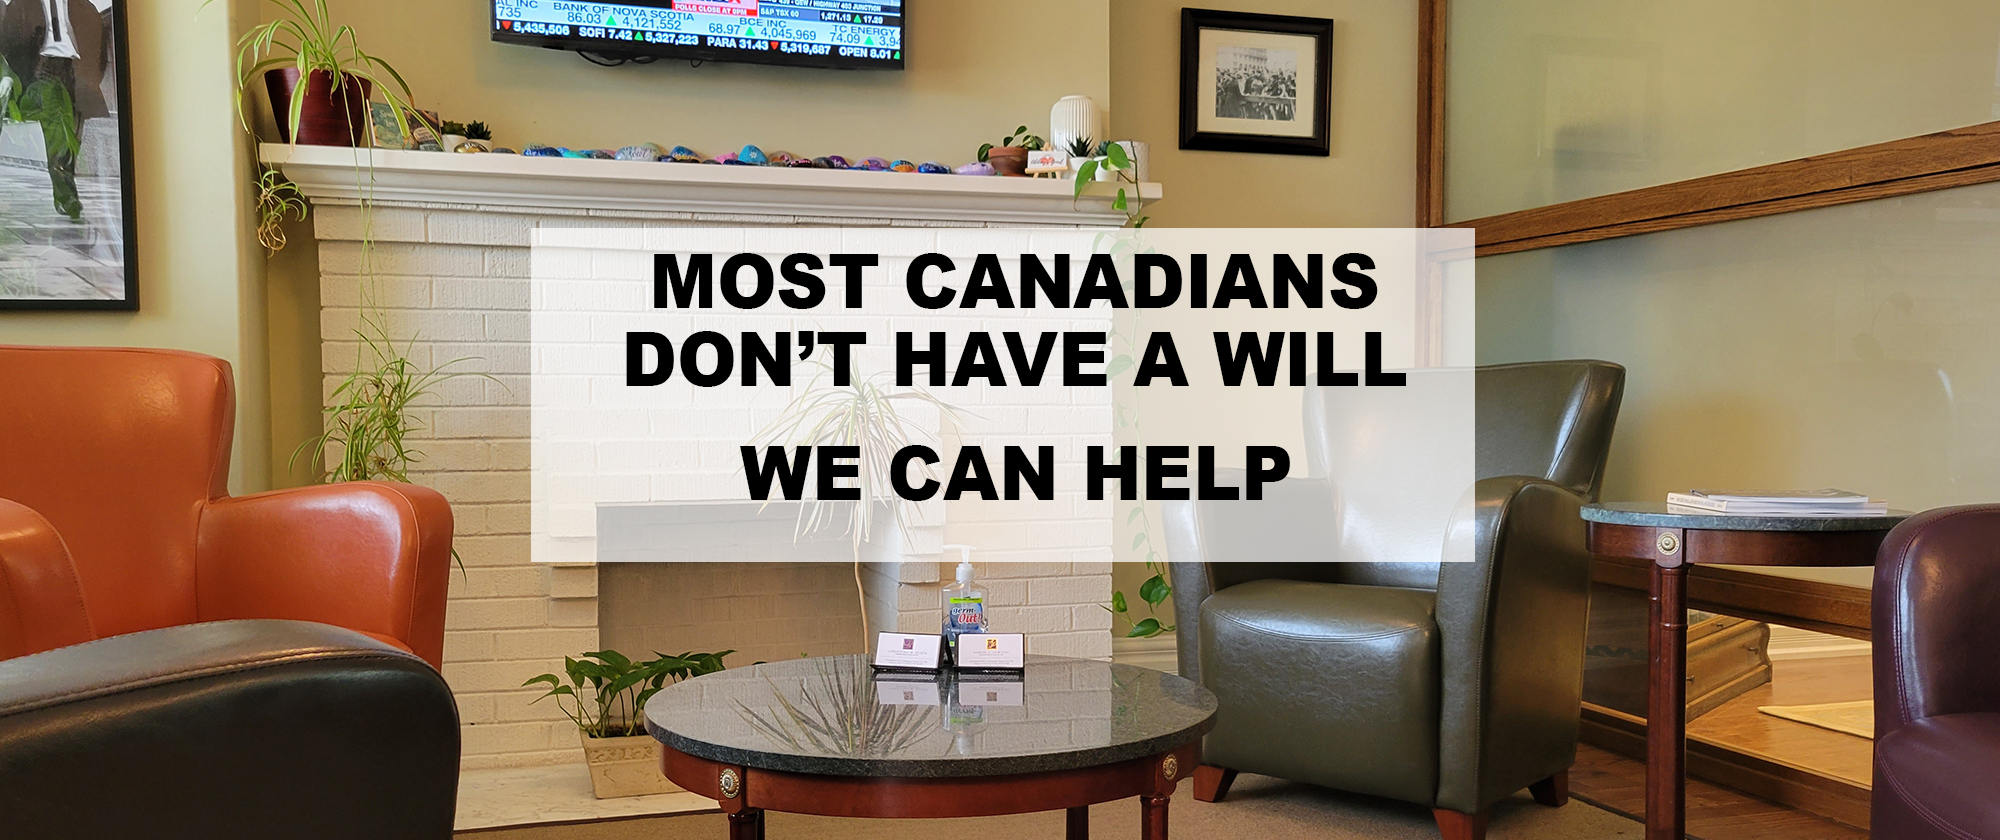 http://MOST%20CANADIANS%20DON’T%20HAVE%20A%20WILL